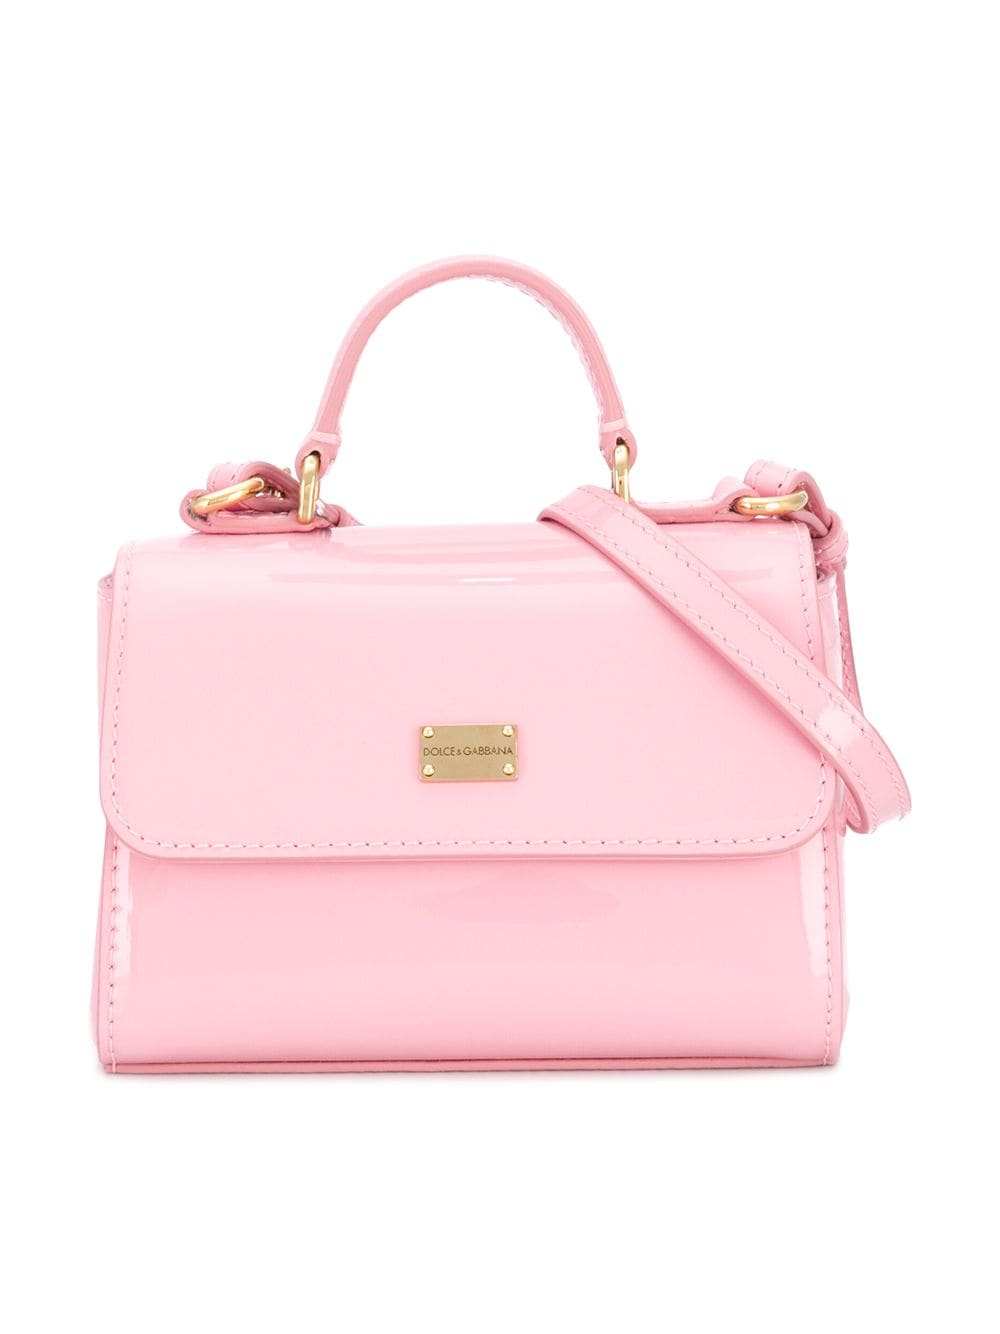 Dolce & Gabbana Kids' Patent Leather Tote Bag In Pink